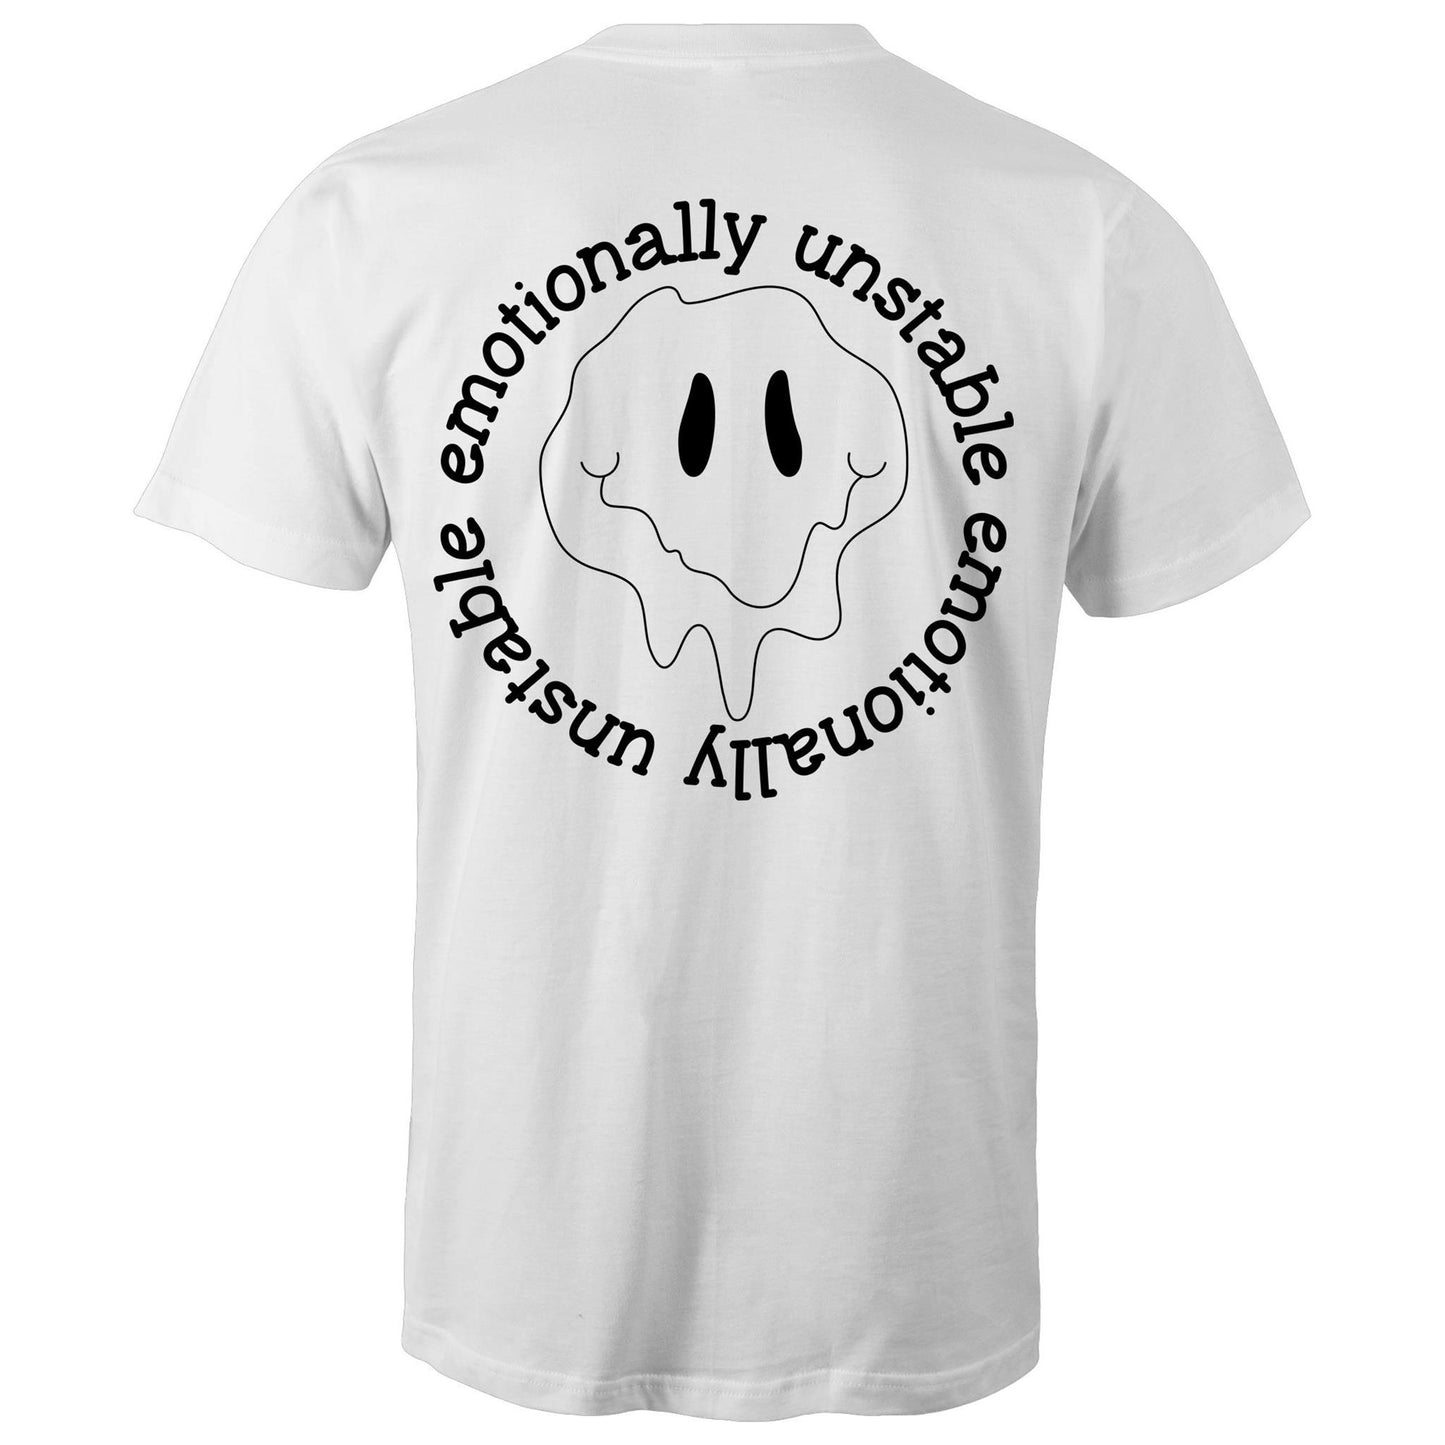 Mens T-Shirt - Emotionally Unstable